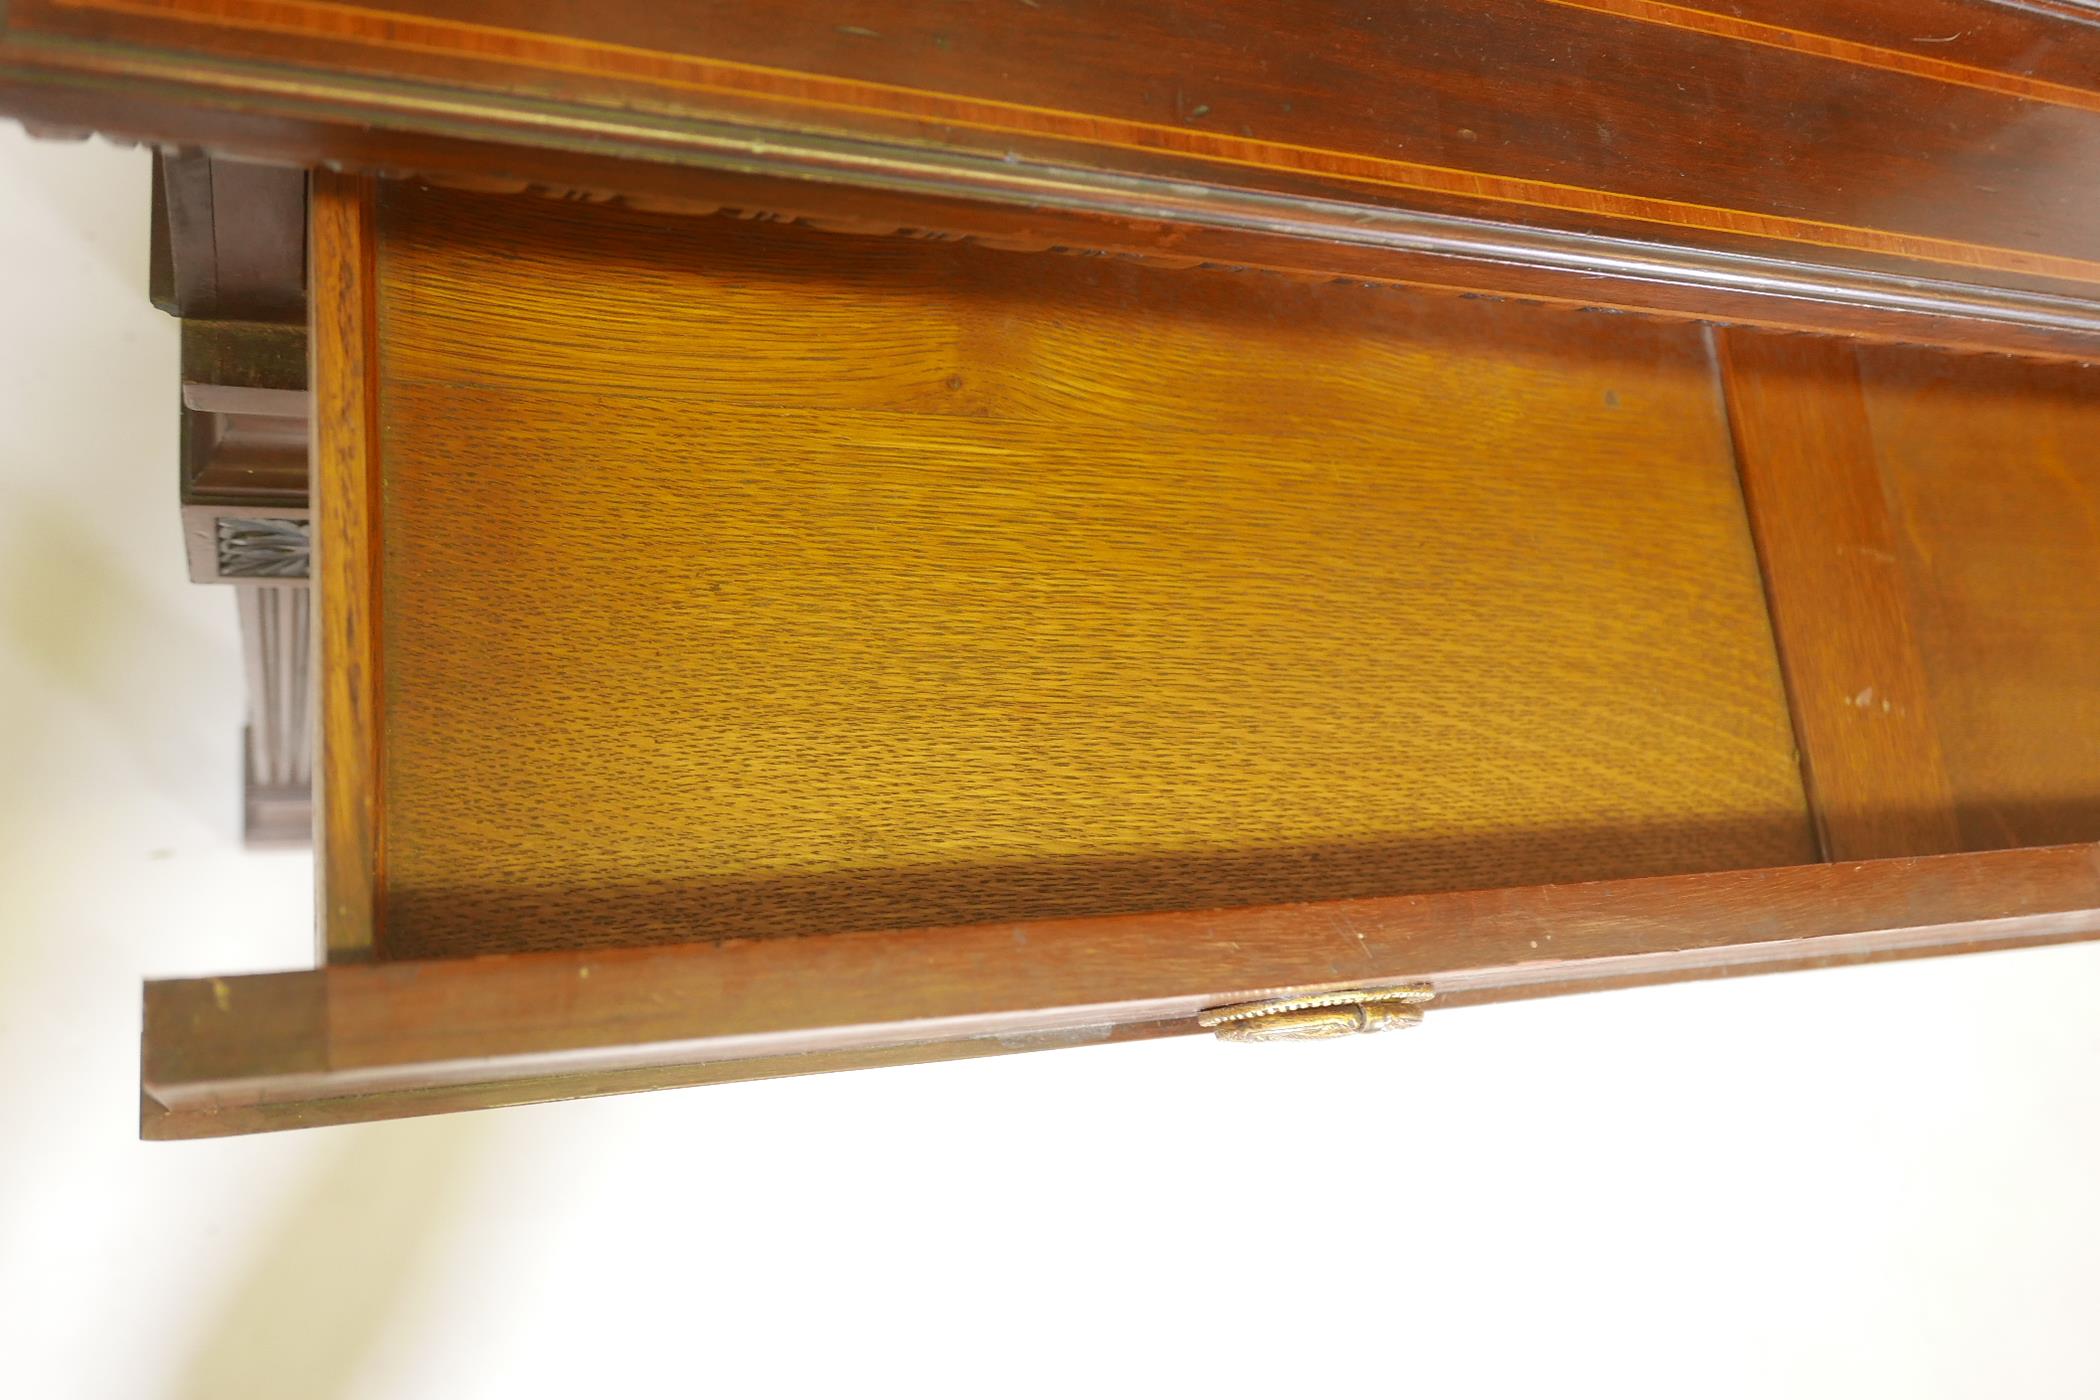 A C19th mahogany two section mahogany display cabinet, with satinwood banded inlay and painted - Image 4 of 8